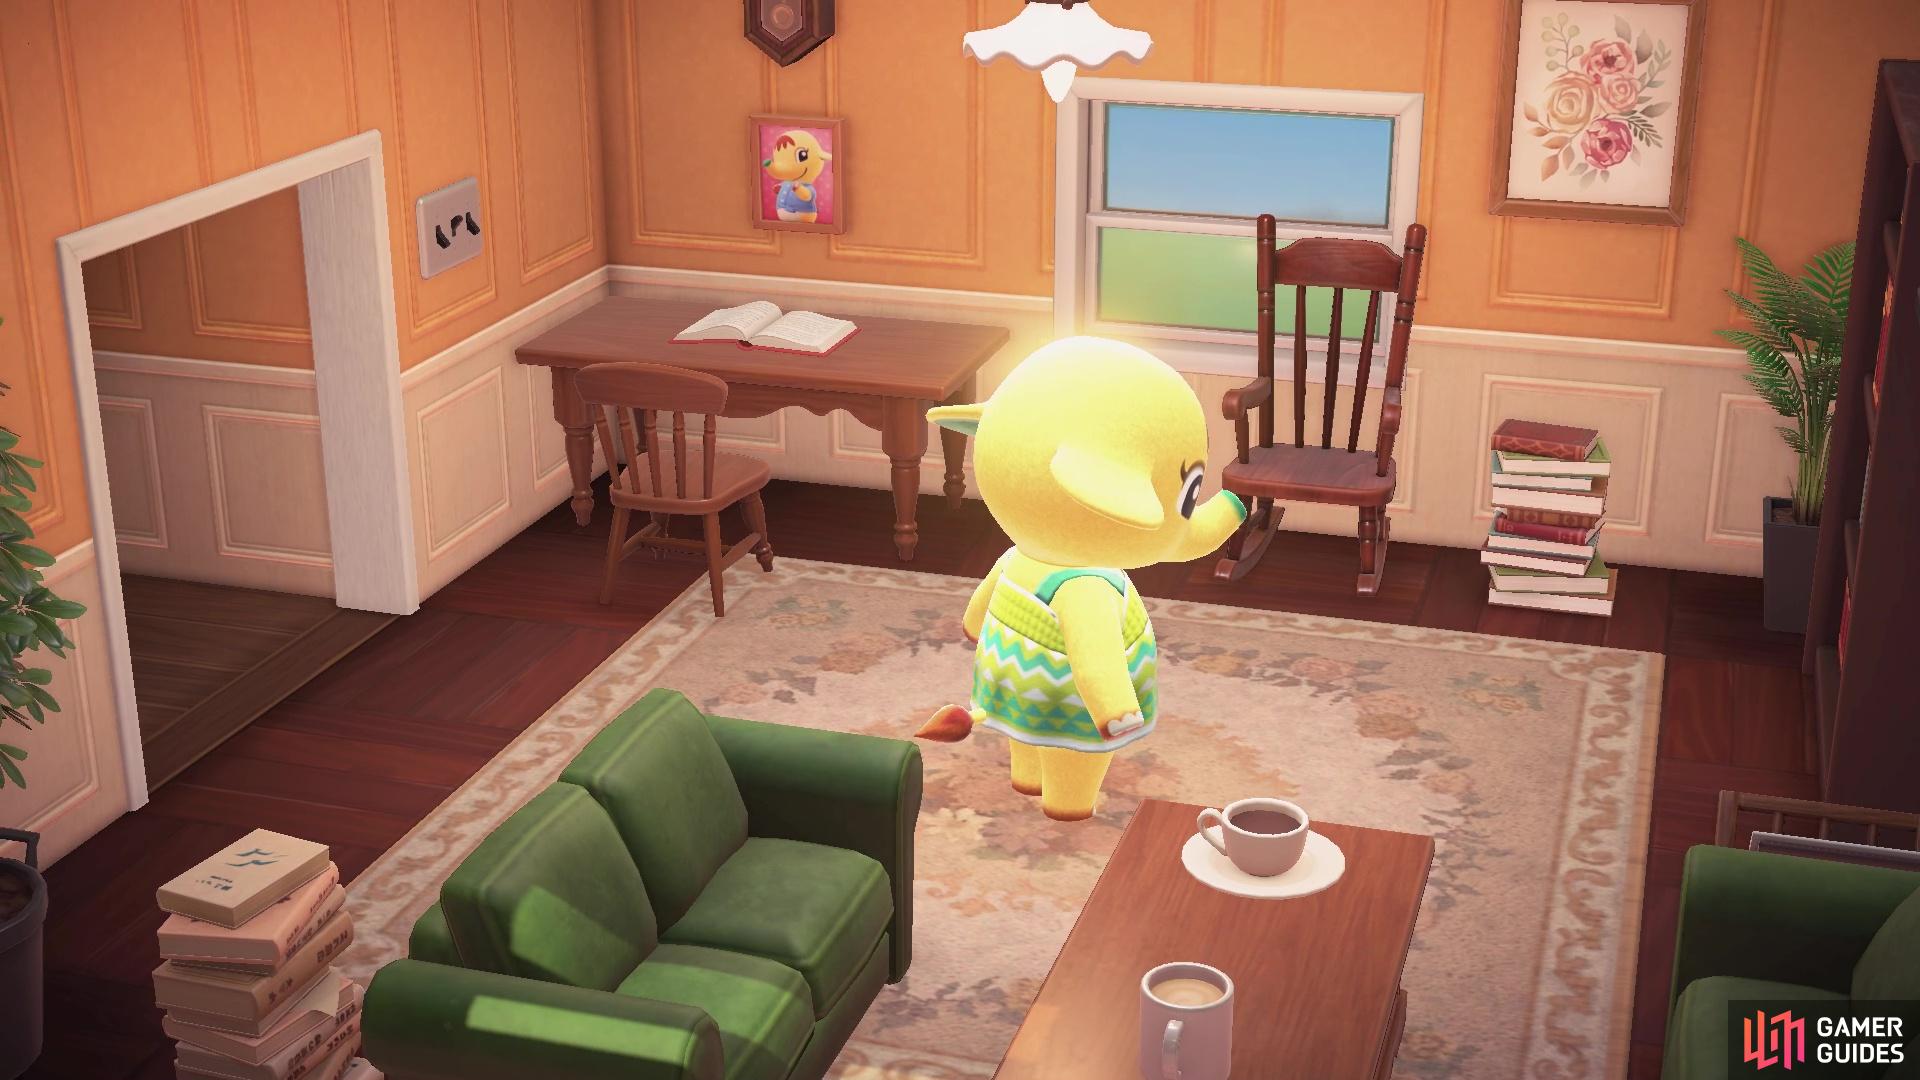 At the end, you’ll get a brief cut scene of Eloise enjoying her new space.